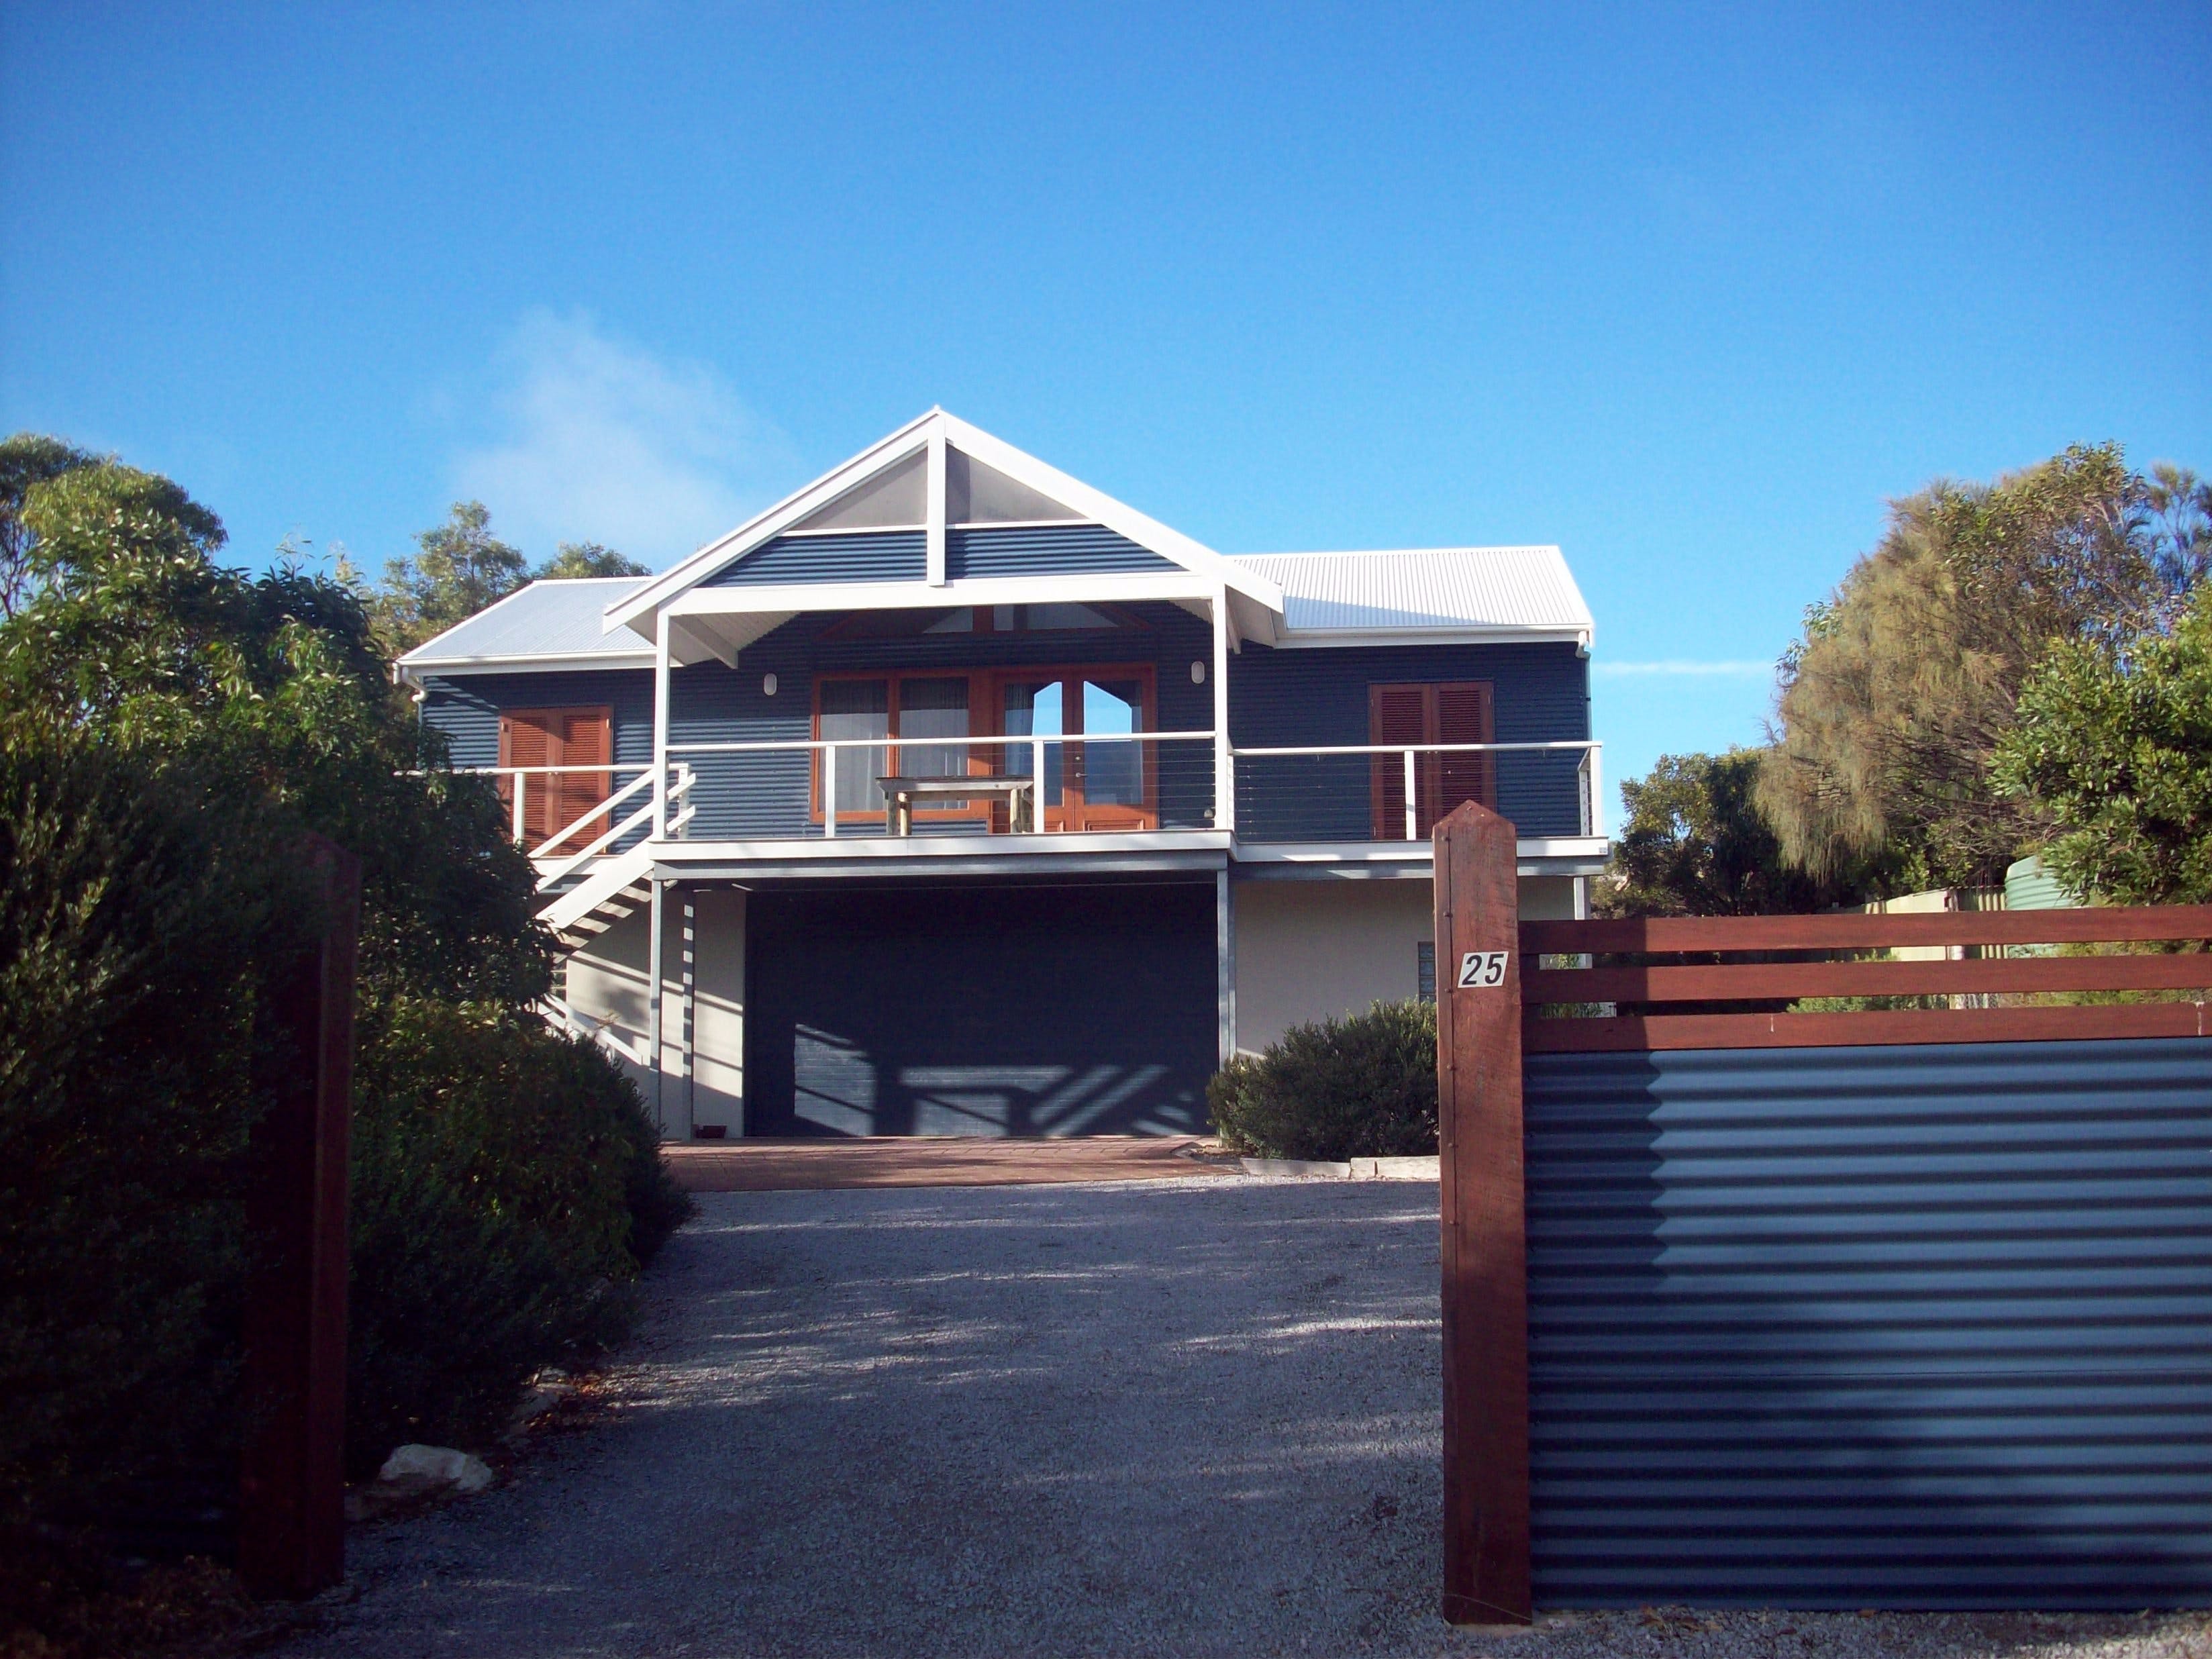 Top Deck Marion Bay - Dalby Accommodation